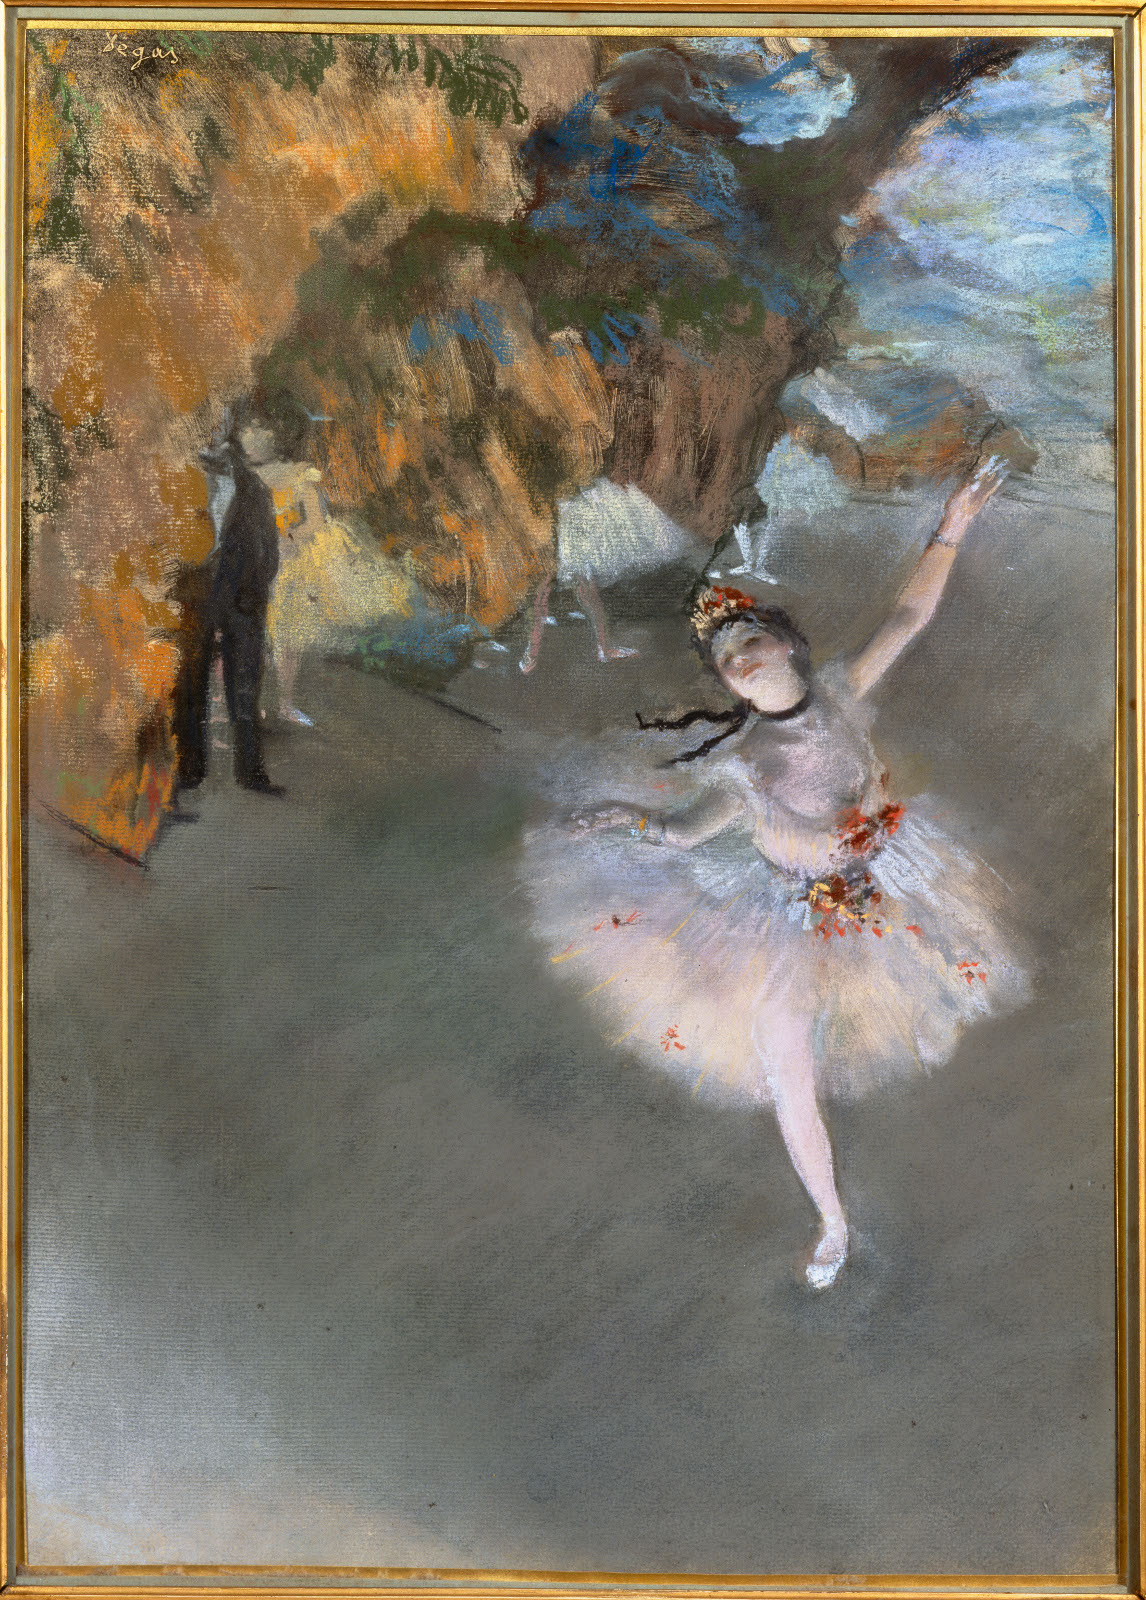 Degas Etoile, exhibited in Giverny Museum 2015